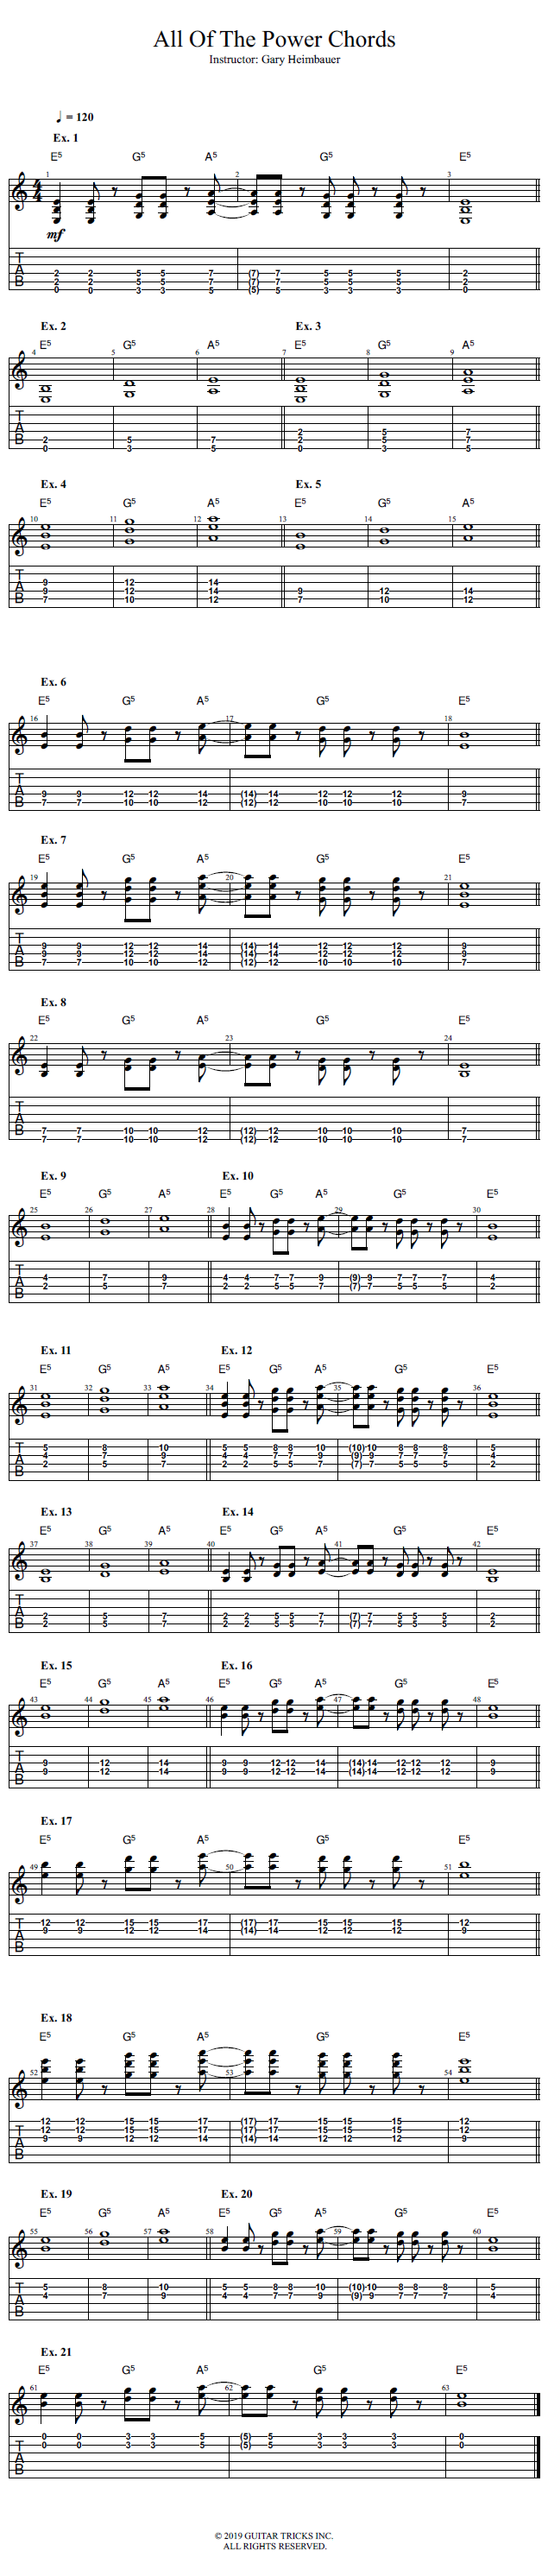 All Of The Power Chords song notation